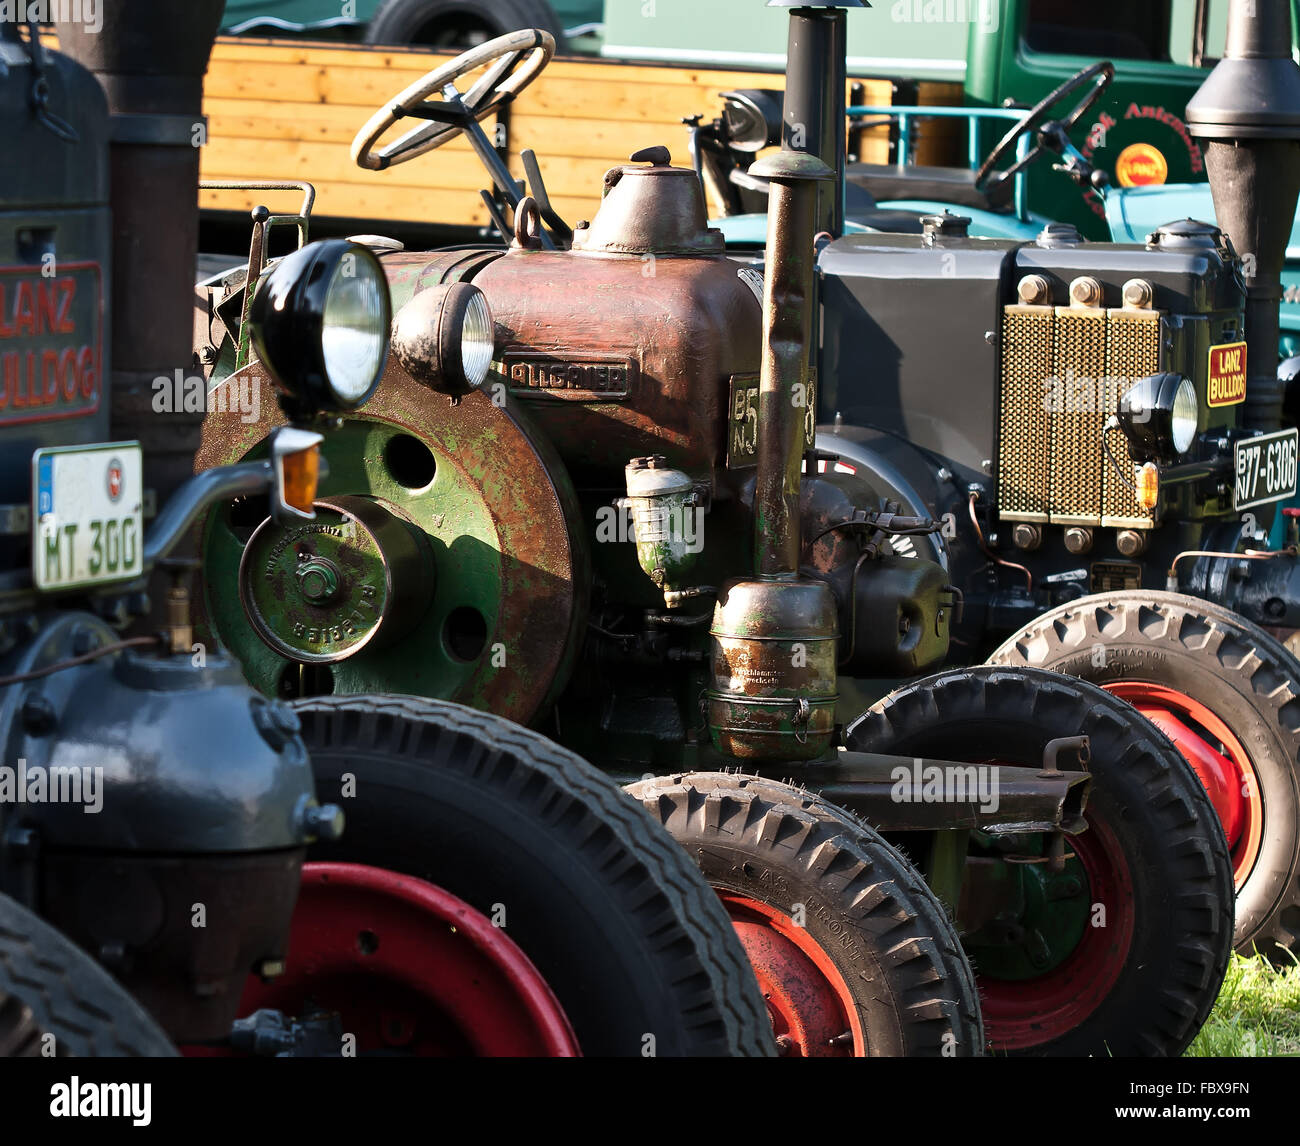 Vintage agricultural machinery exhibition Stock Photo